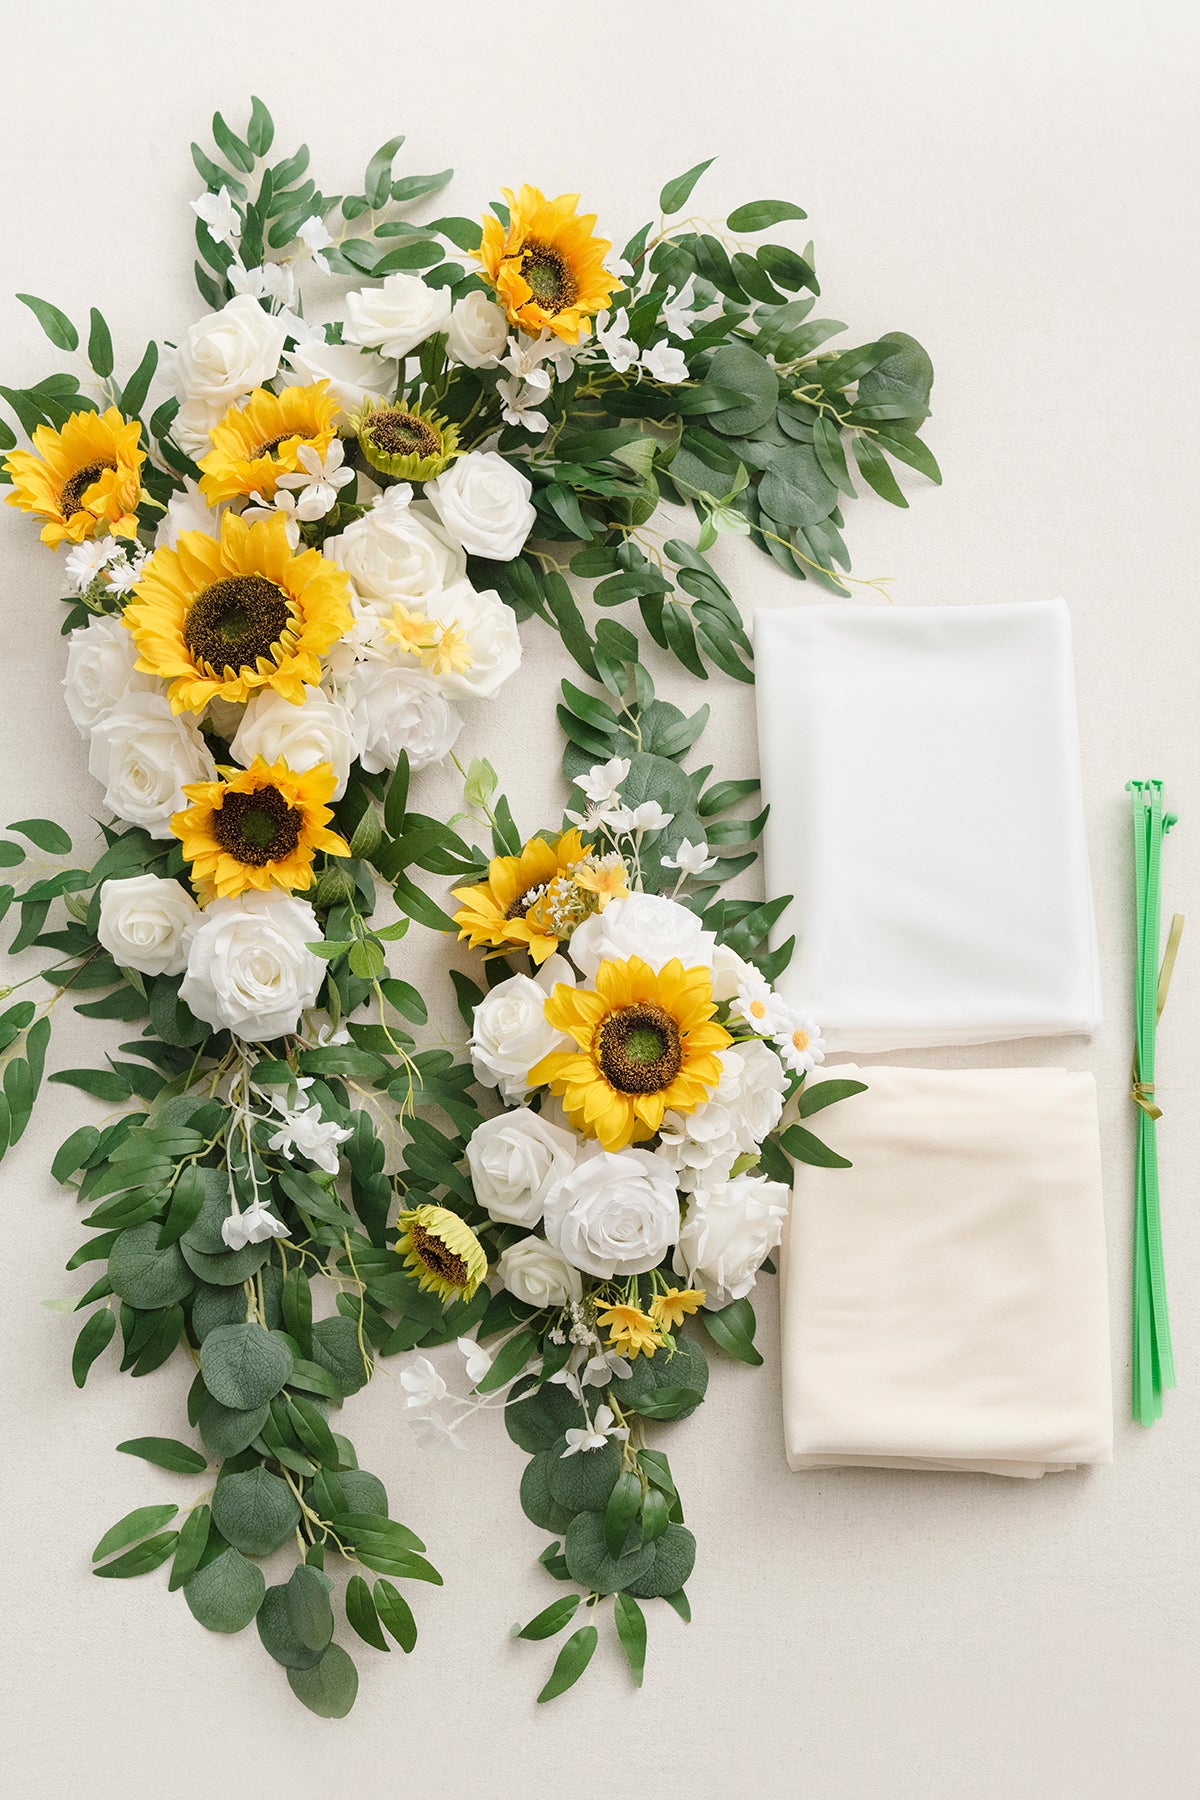 Flower Arch Decor with Drape in Bright Sunflower | Clearance